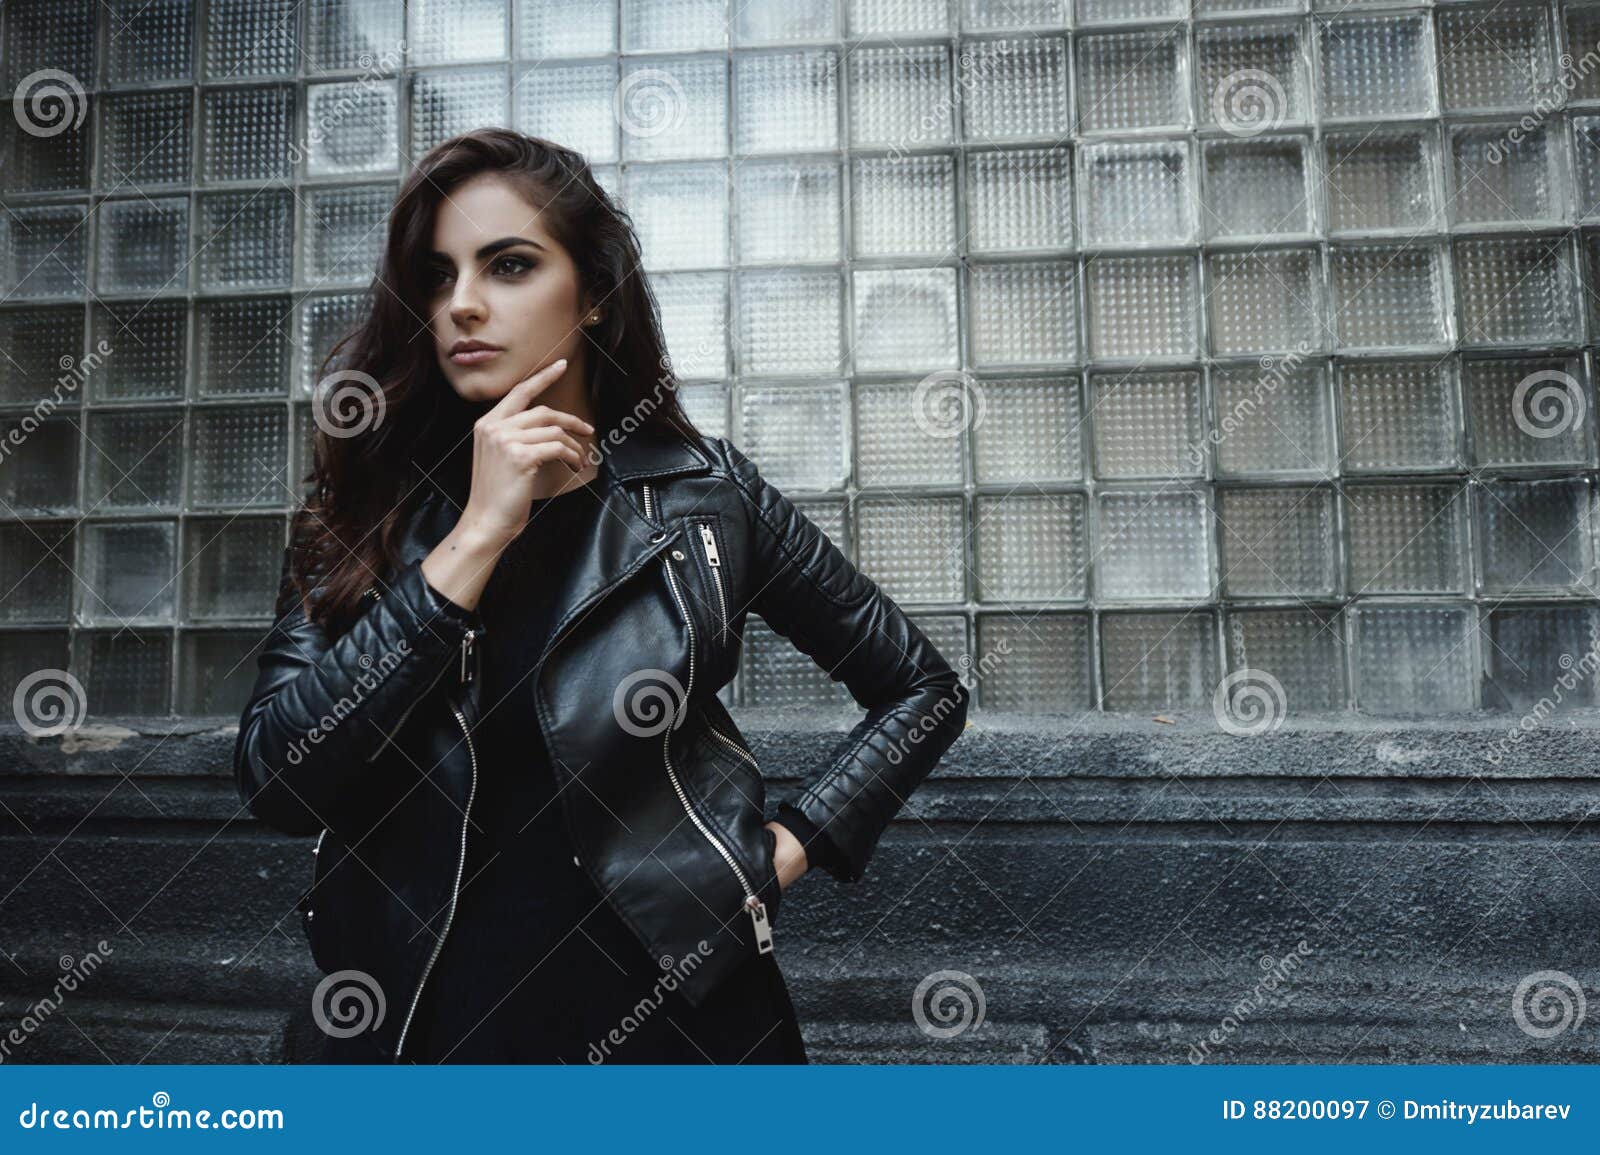 Woman in Leather Jacket Posing by Tree · Free Stock Photo